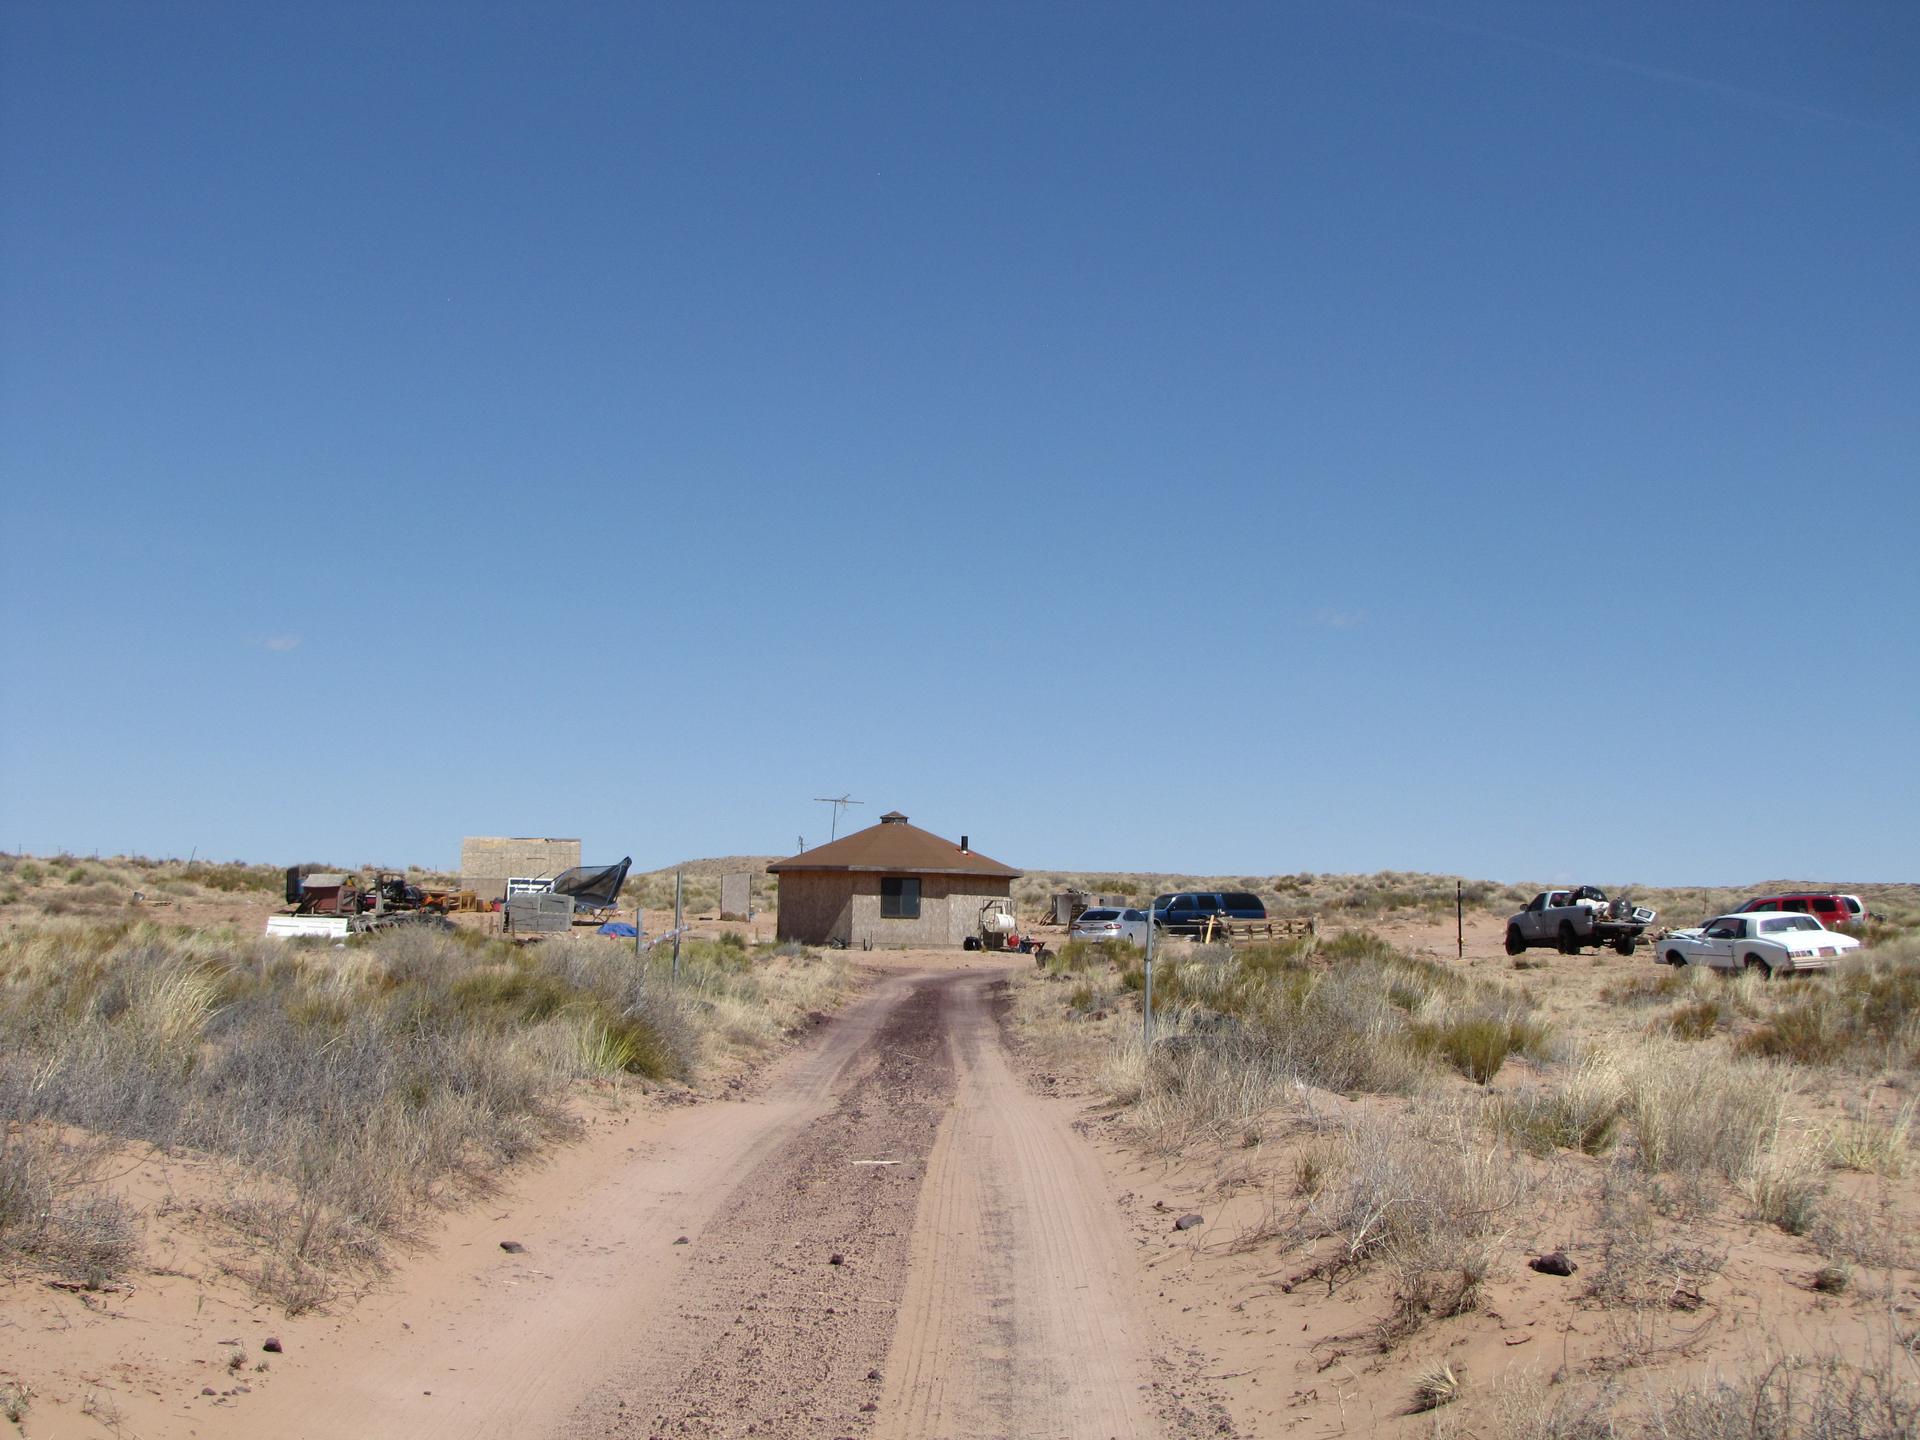 The Dickson family's hogan on the Navajo Nation has no running water. But DIGDEEP is raising money to connect the home to a water line 1,200 feet away.